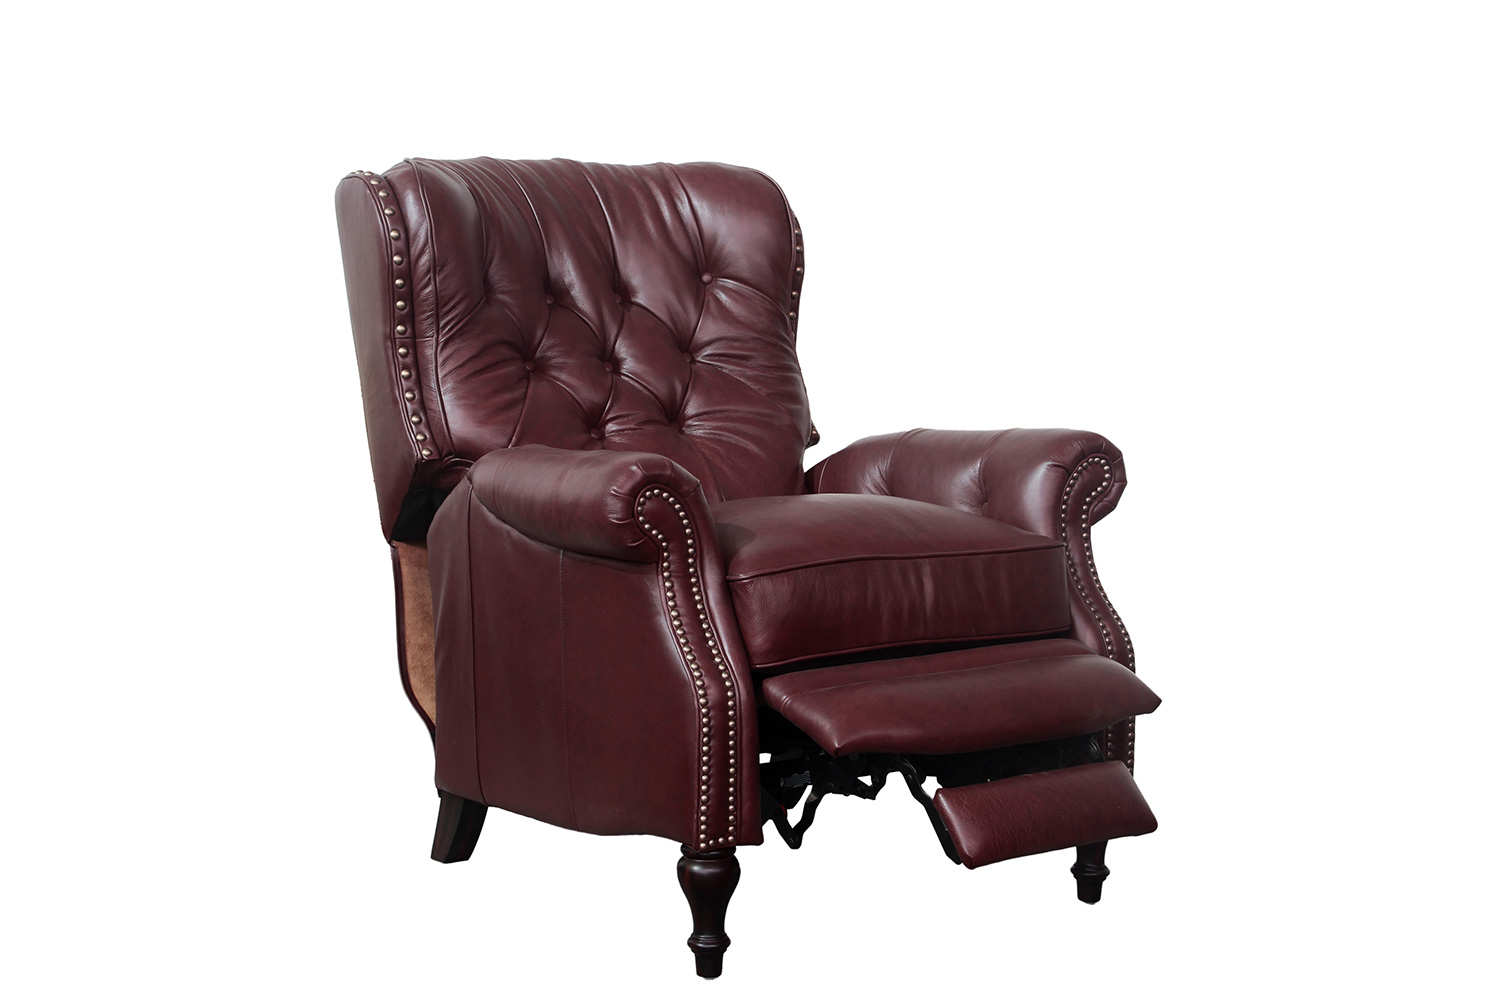 Barcalounger KendAll Recliner Chair - Shoreham Wine/All Leather